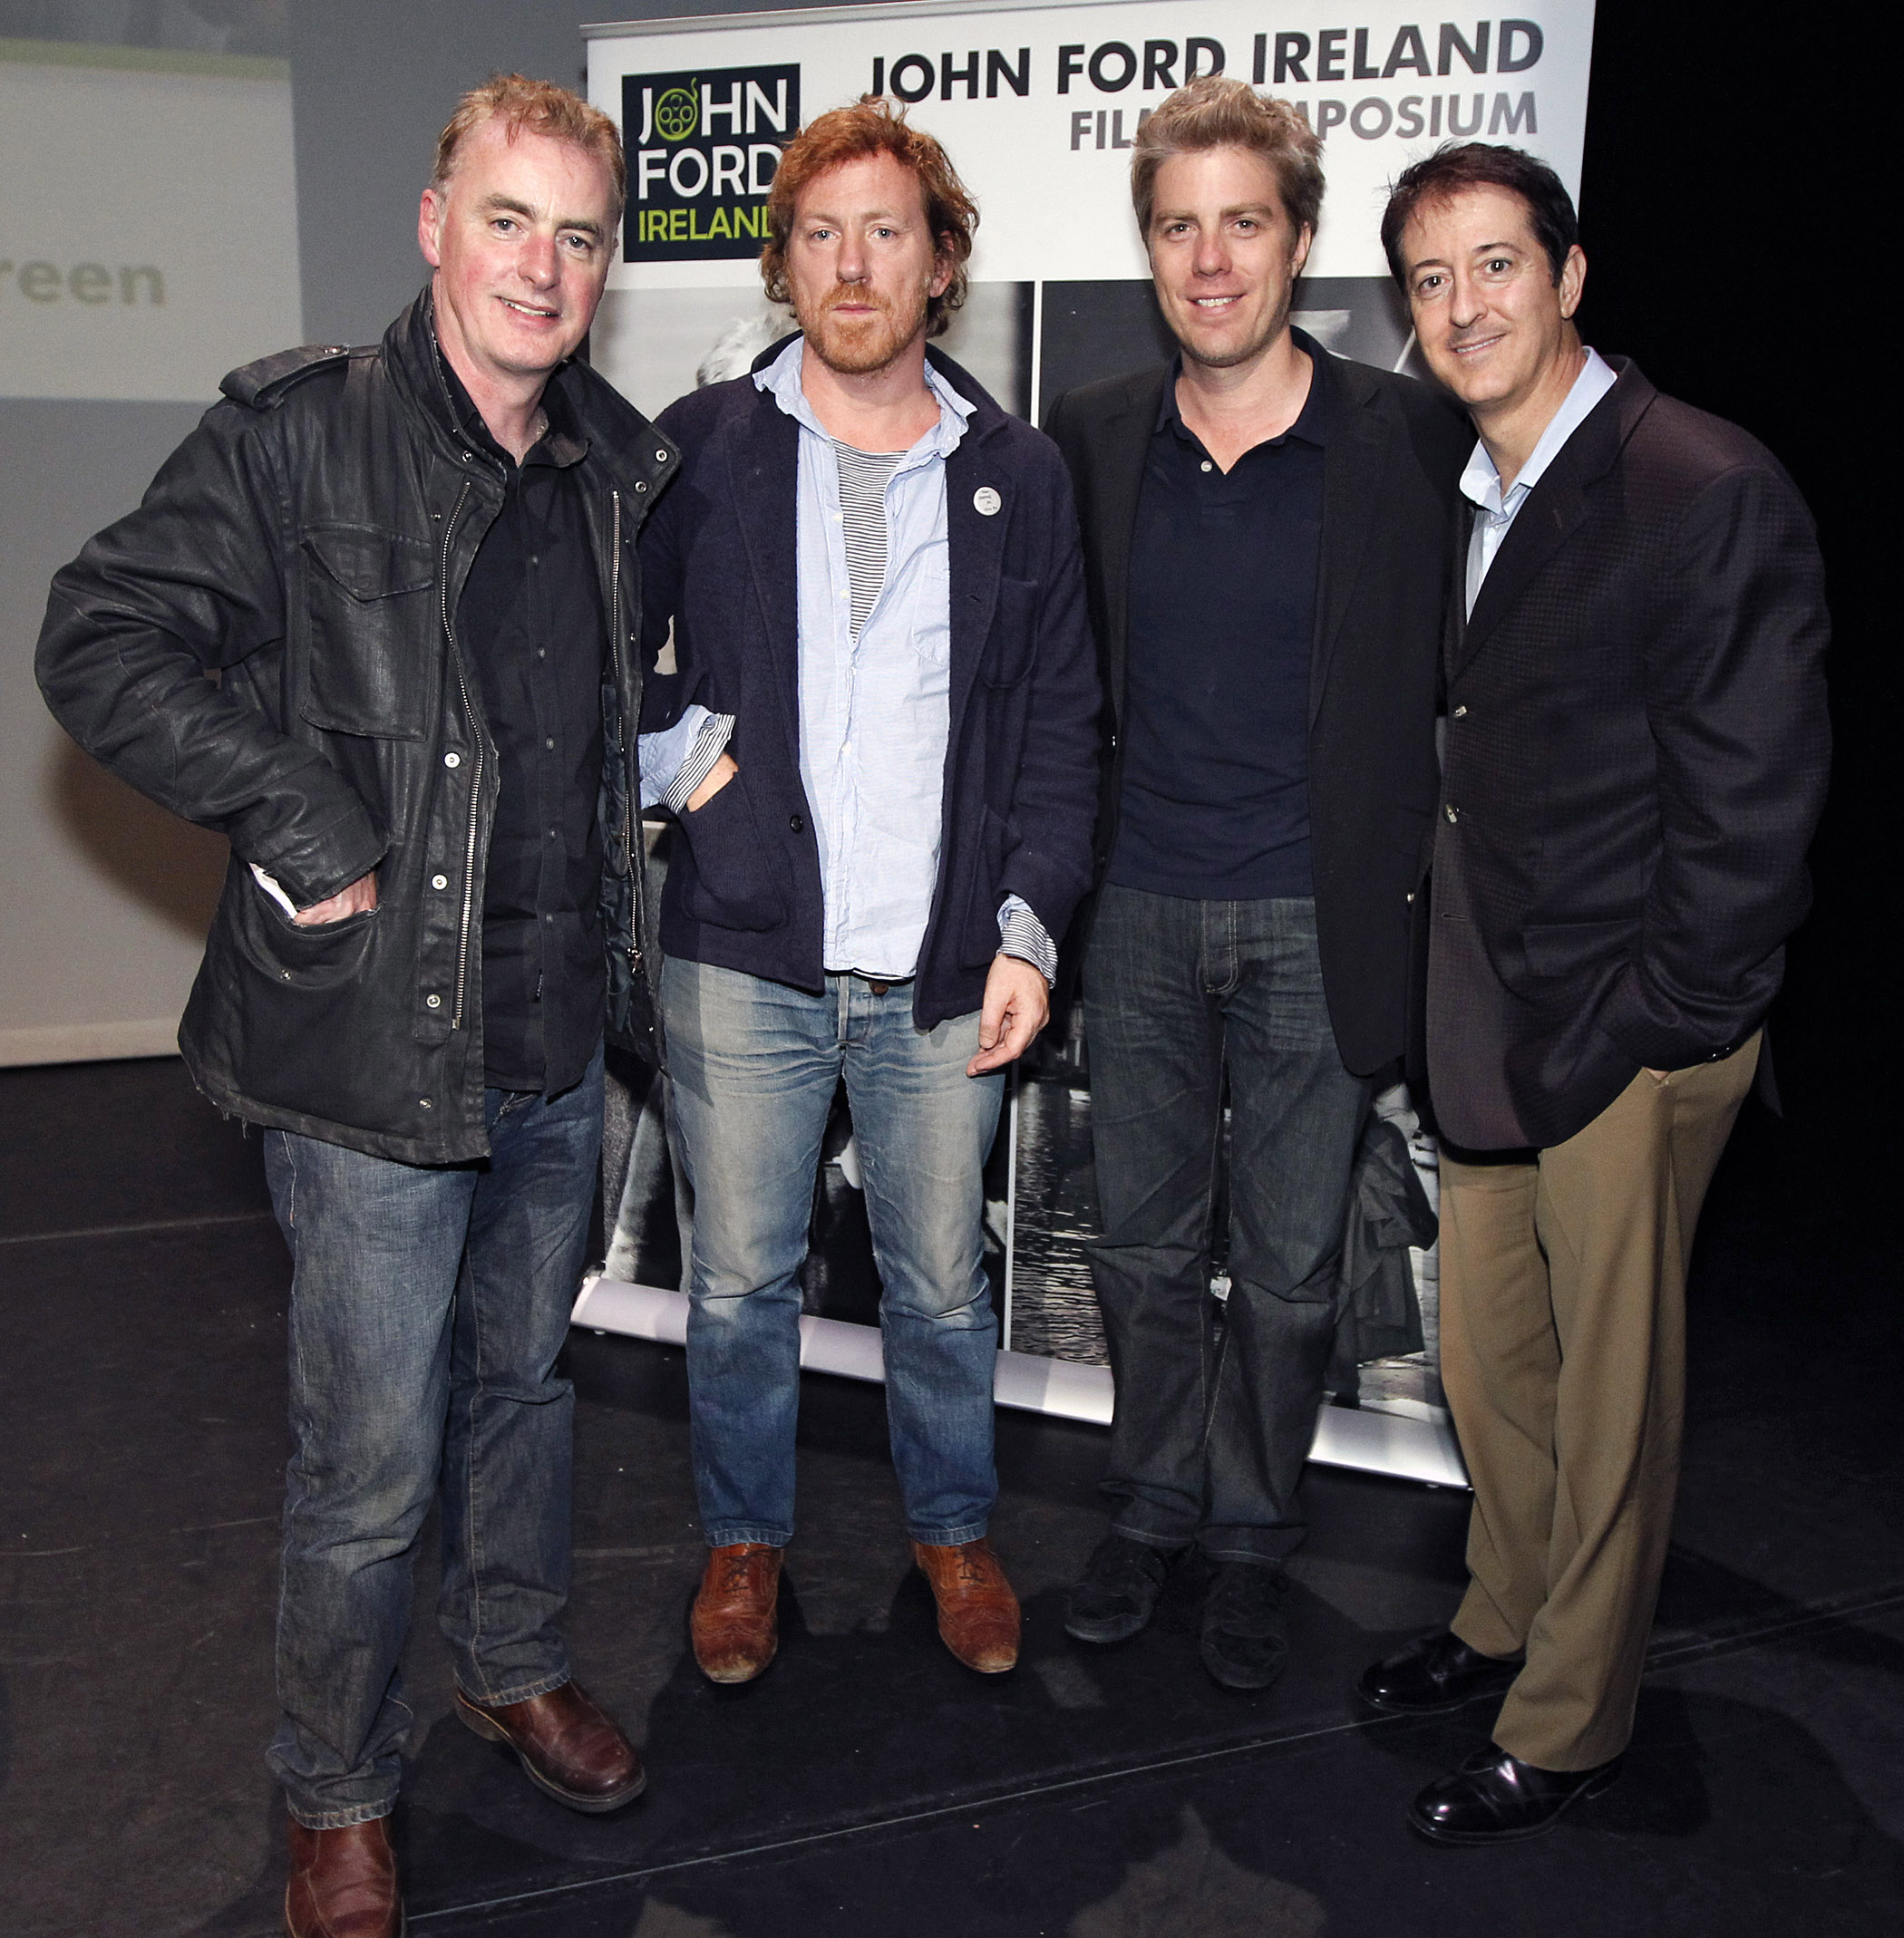 Dave Fanning, David Holmes, Kyle Eastwood & Christopher Caliendo were pictured at the Music For The Screen workshop, at The Project Arts Centre, Dublin, as part of the 1st John Ford Ireland Film Symposium, on 9th  June 2012. www.johnfordireland.org for full programme information and tickets.
Copyright Notice: